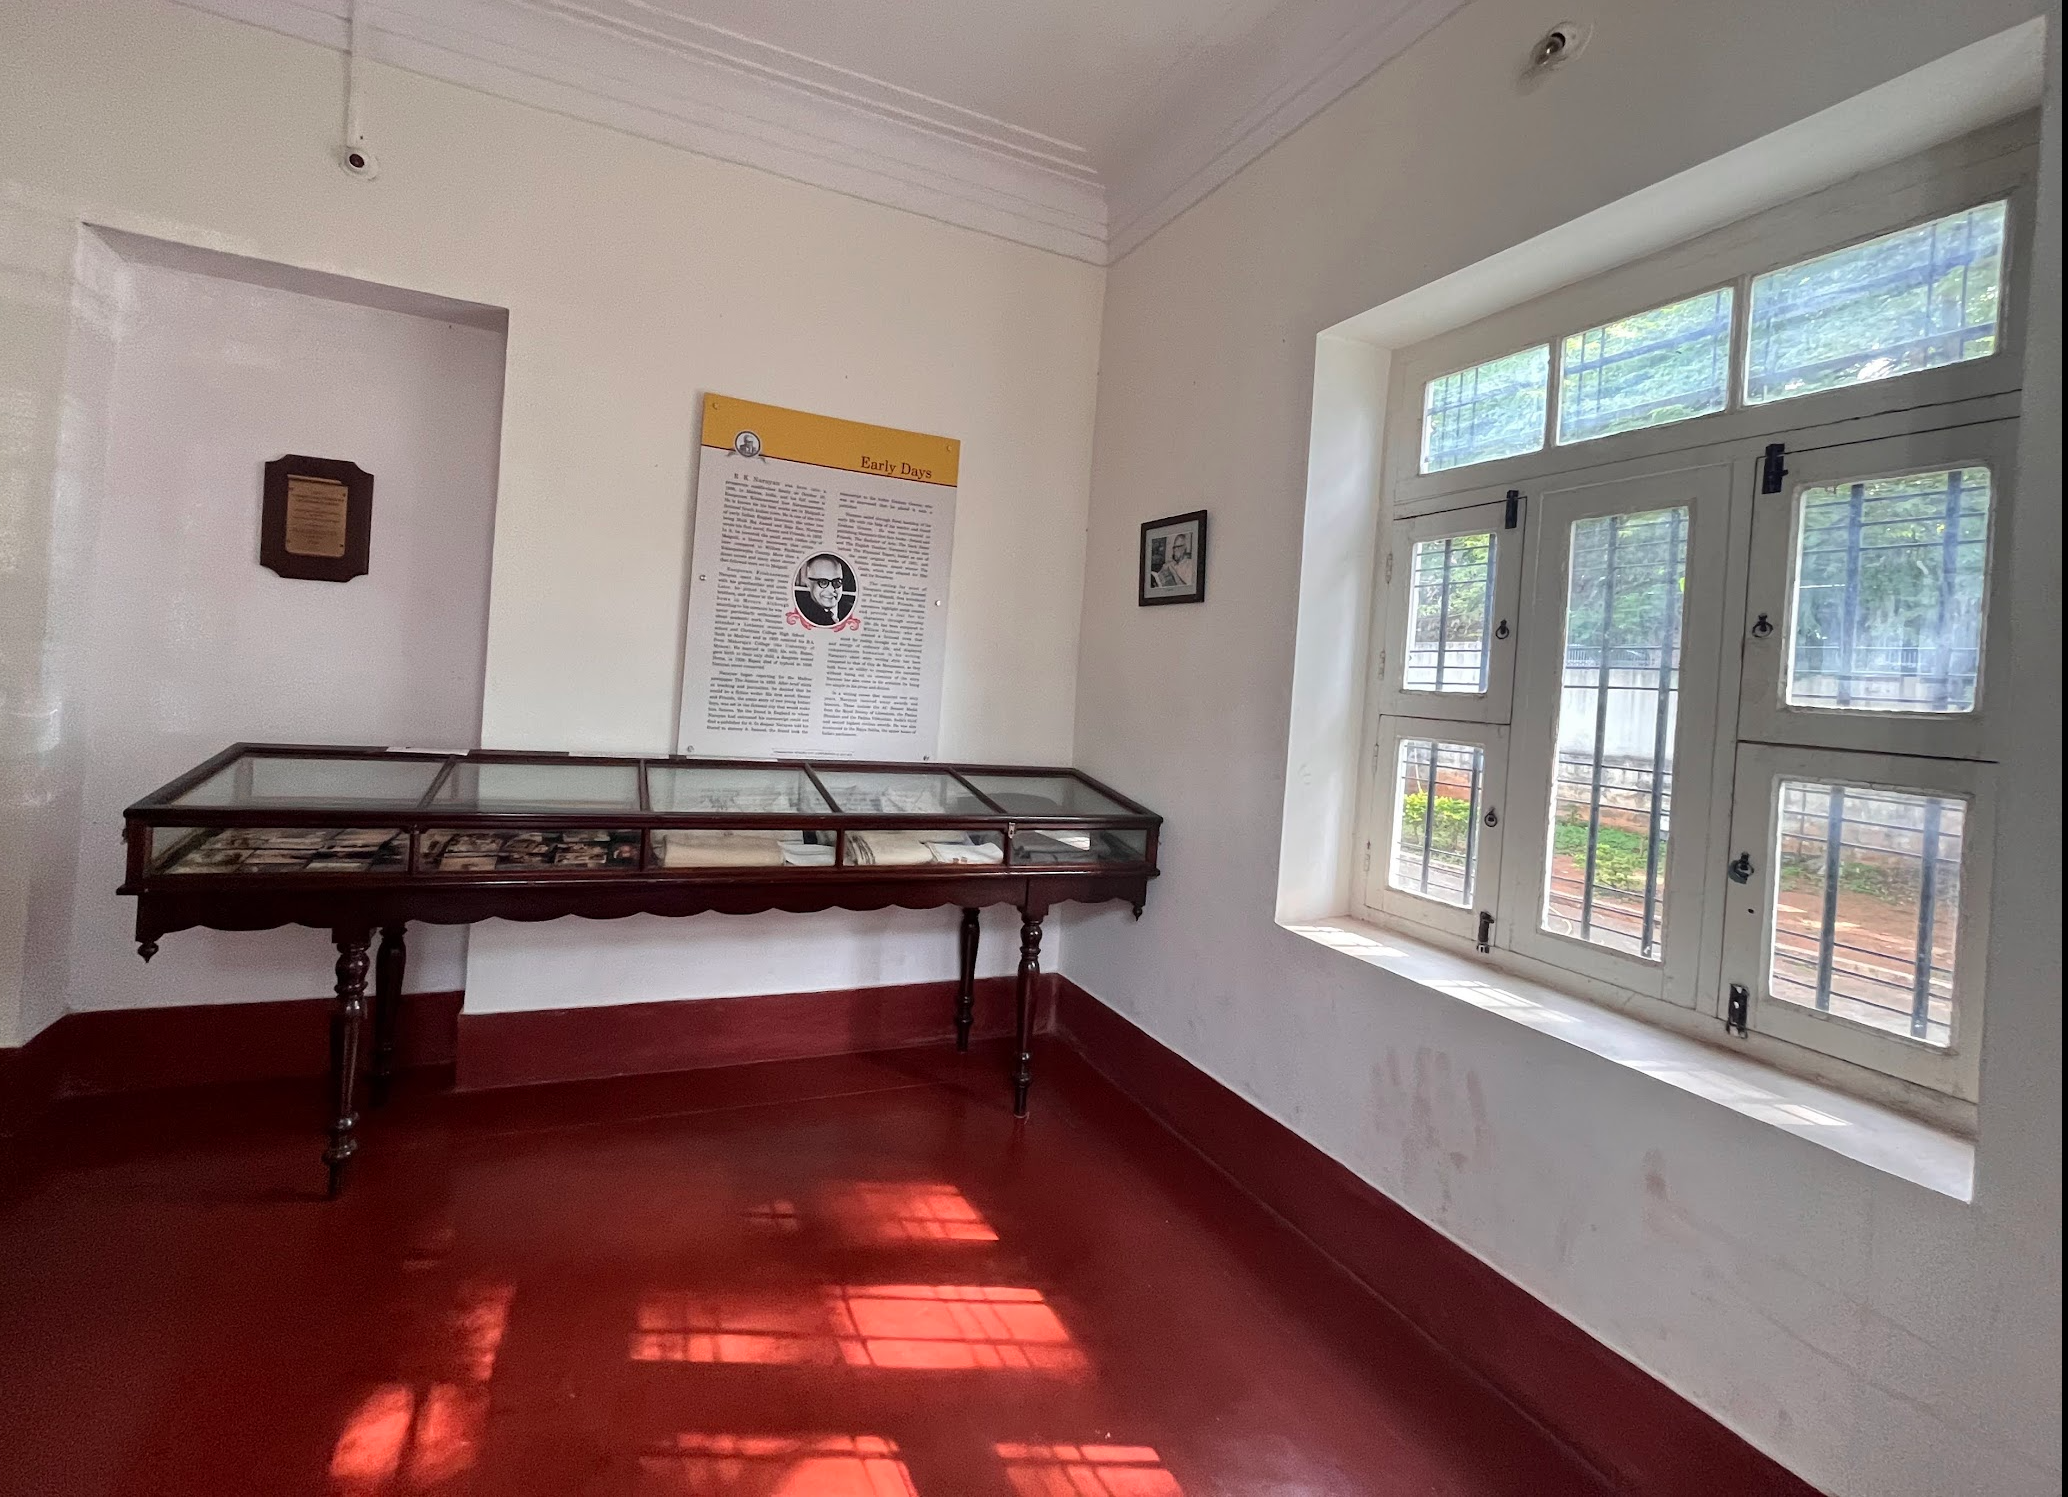 <b>The sun-dappled, open, airy home would've been an ideal place for the author to work. In his time, it allowed him views up to Chamundi Hills, something no longer visible with higher buildings around. </b>